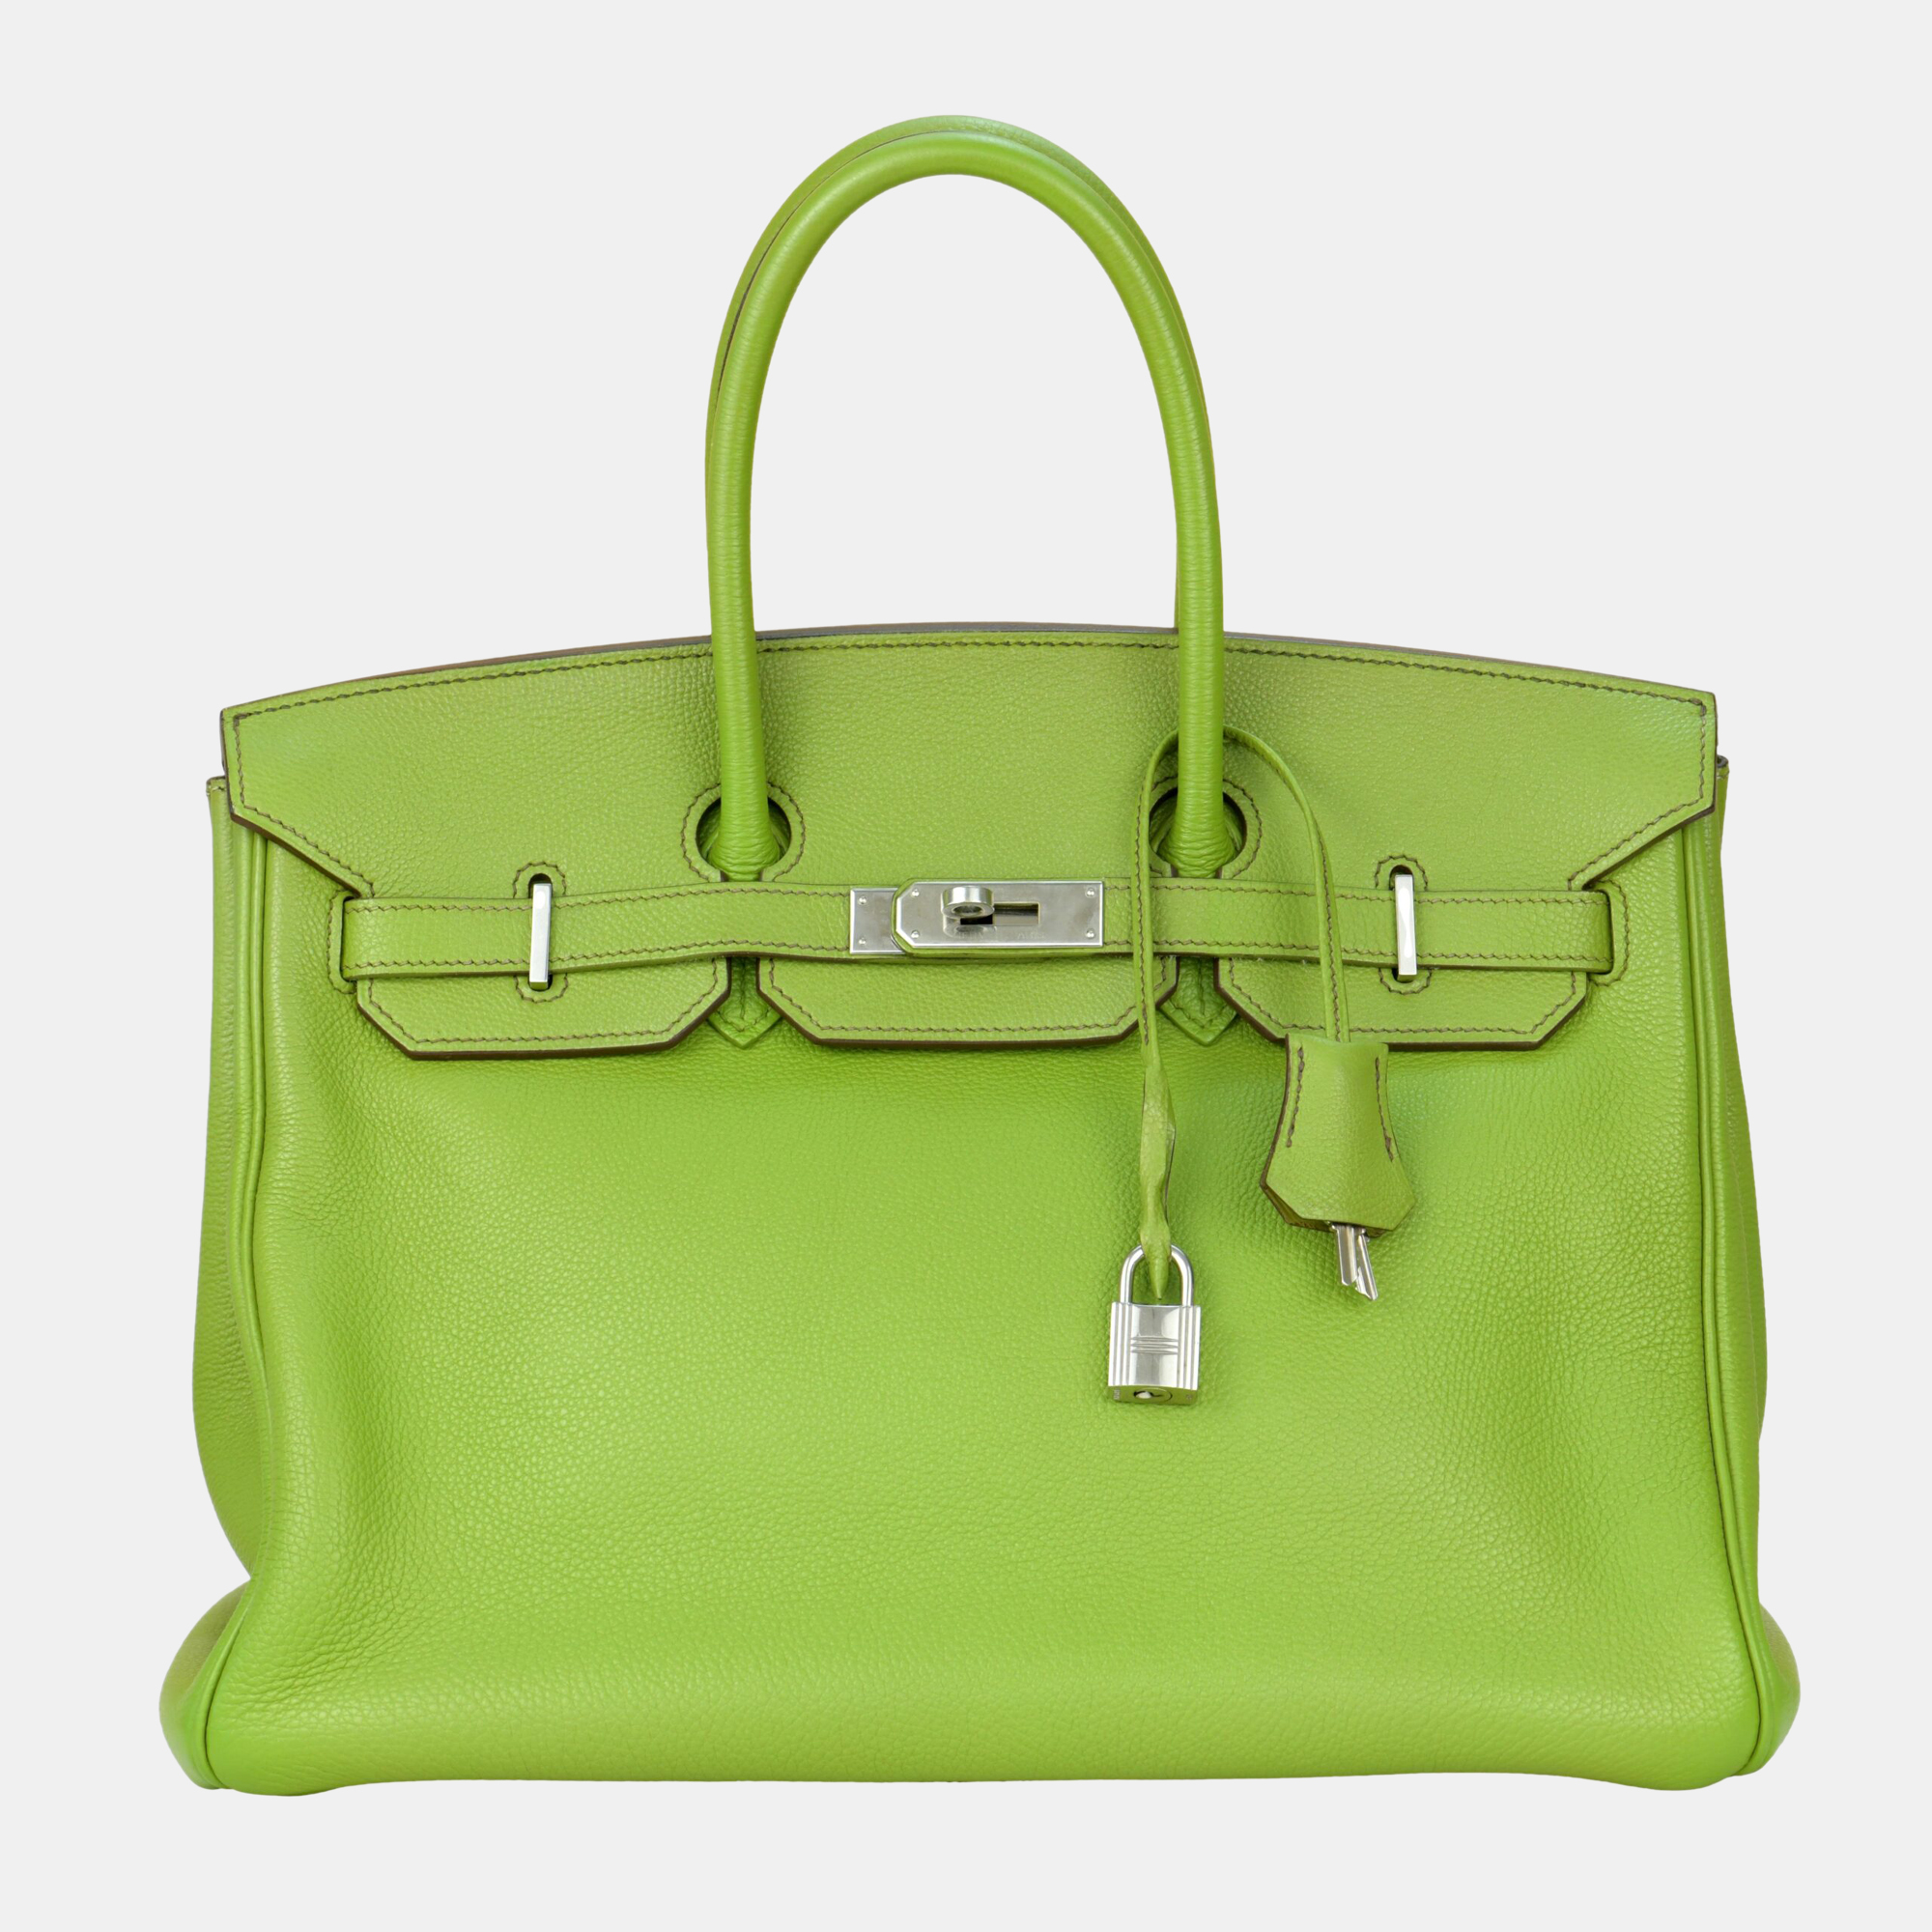 Hermes anise green togo leather birkin 35cm with silver hardware